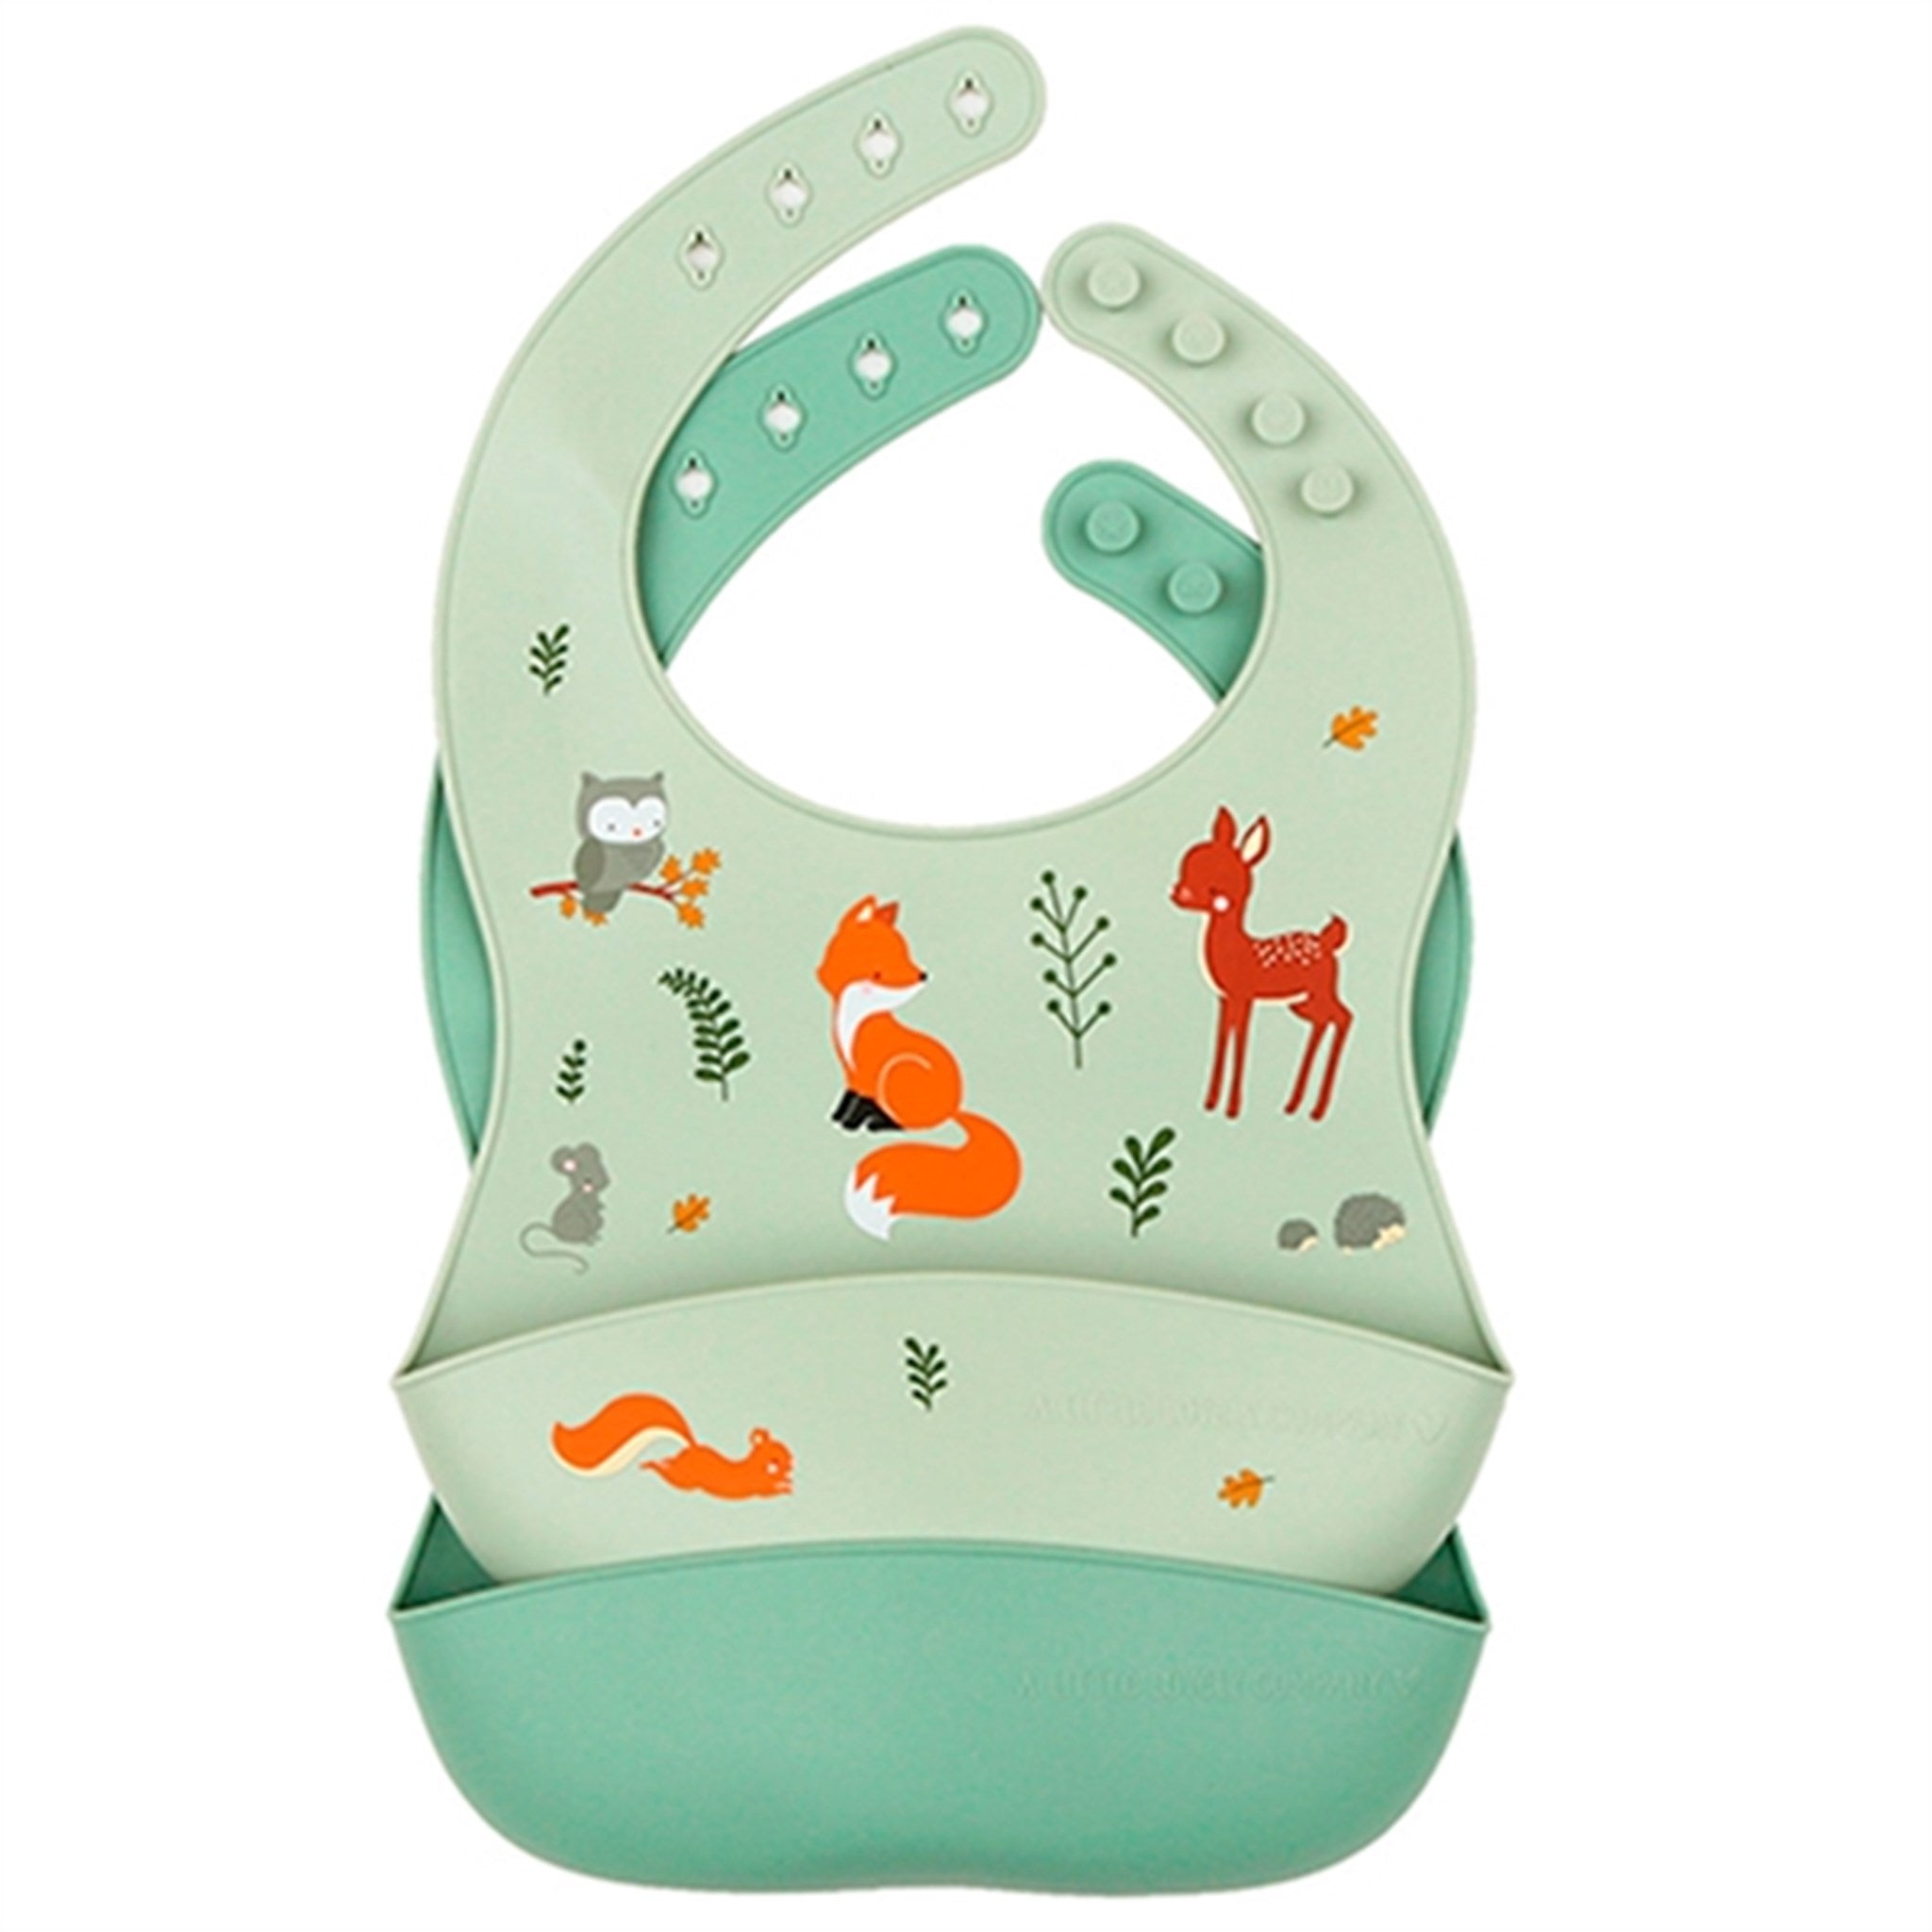 A Little Lovely Company Silicone Bib 2-pack Forest Friends